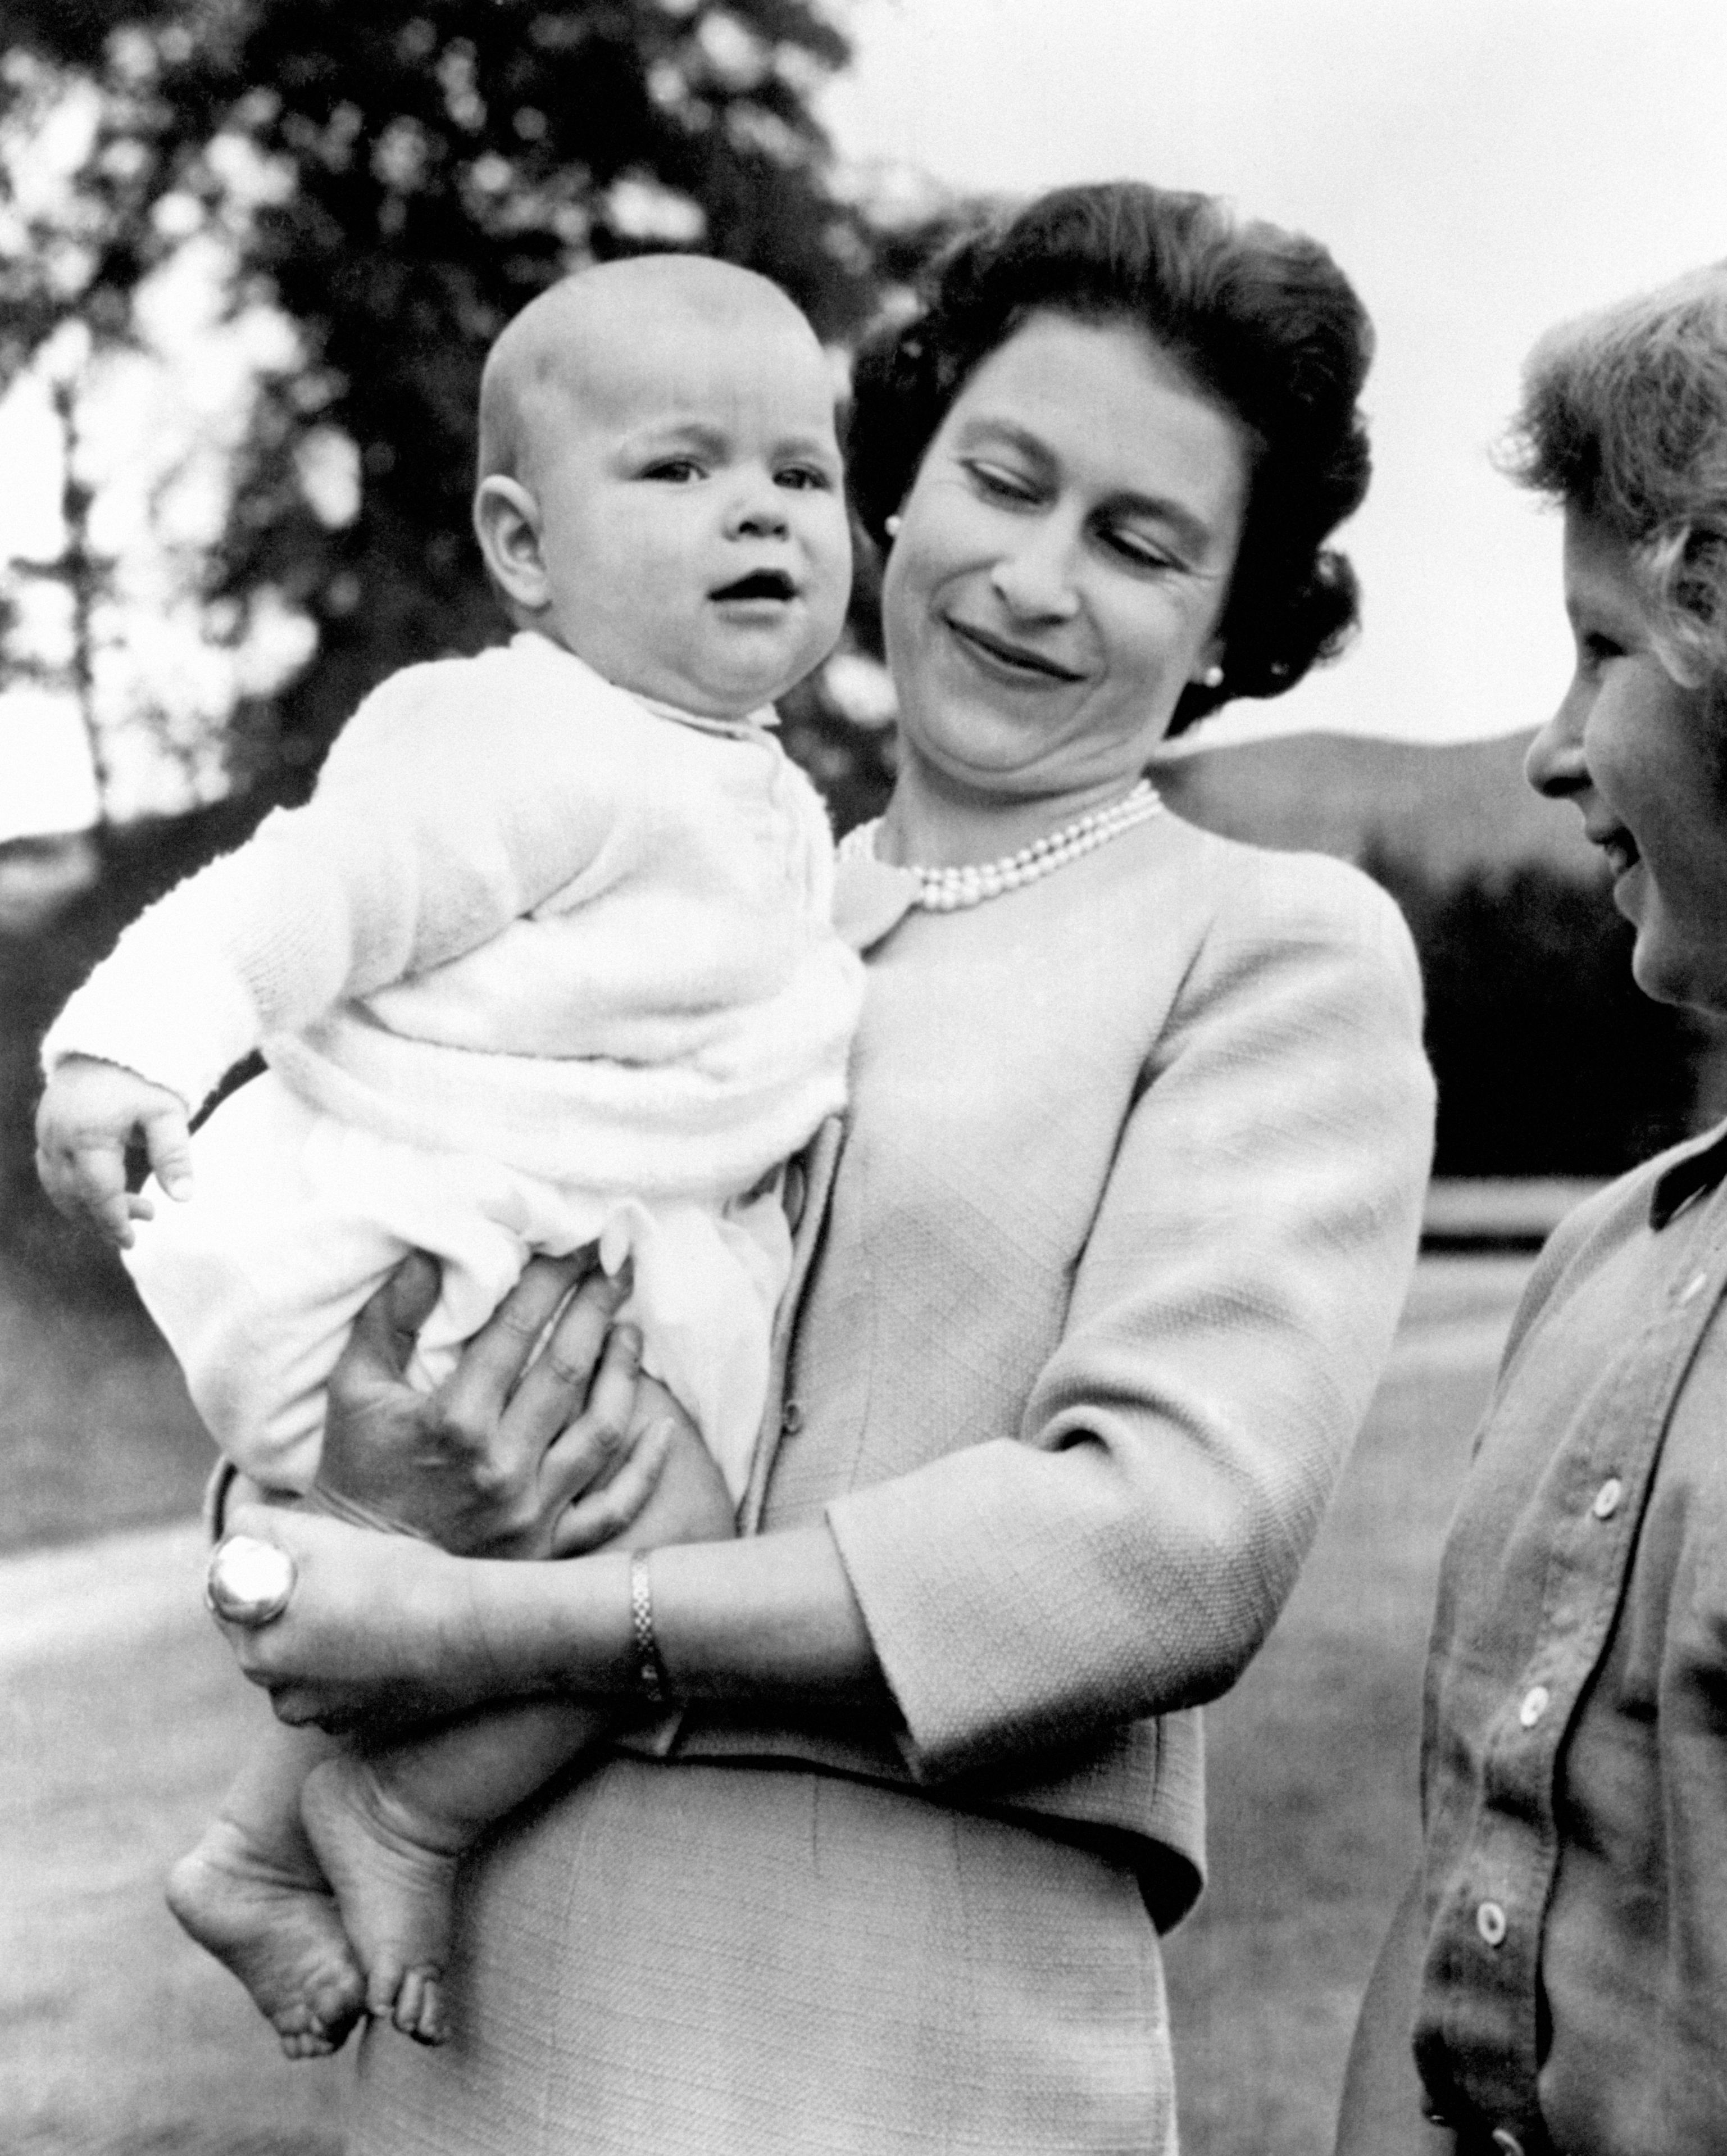 <p>Queen Elizabeth II carried a young Prince Andrew during an outing on the grounds of her home at Balmoral Castle in Scotland on Nov. 8, 1960.</p>